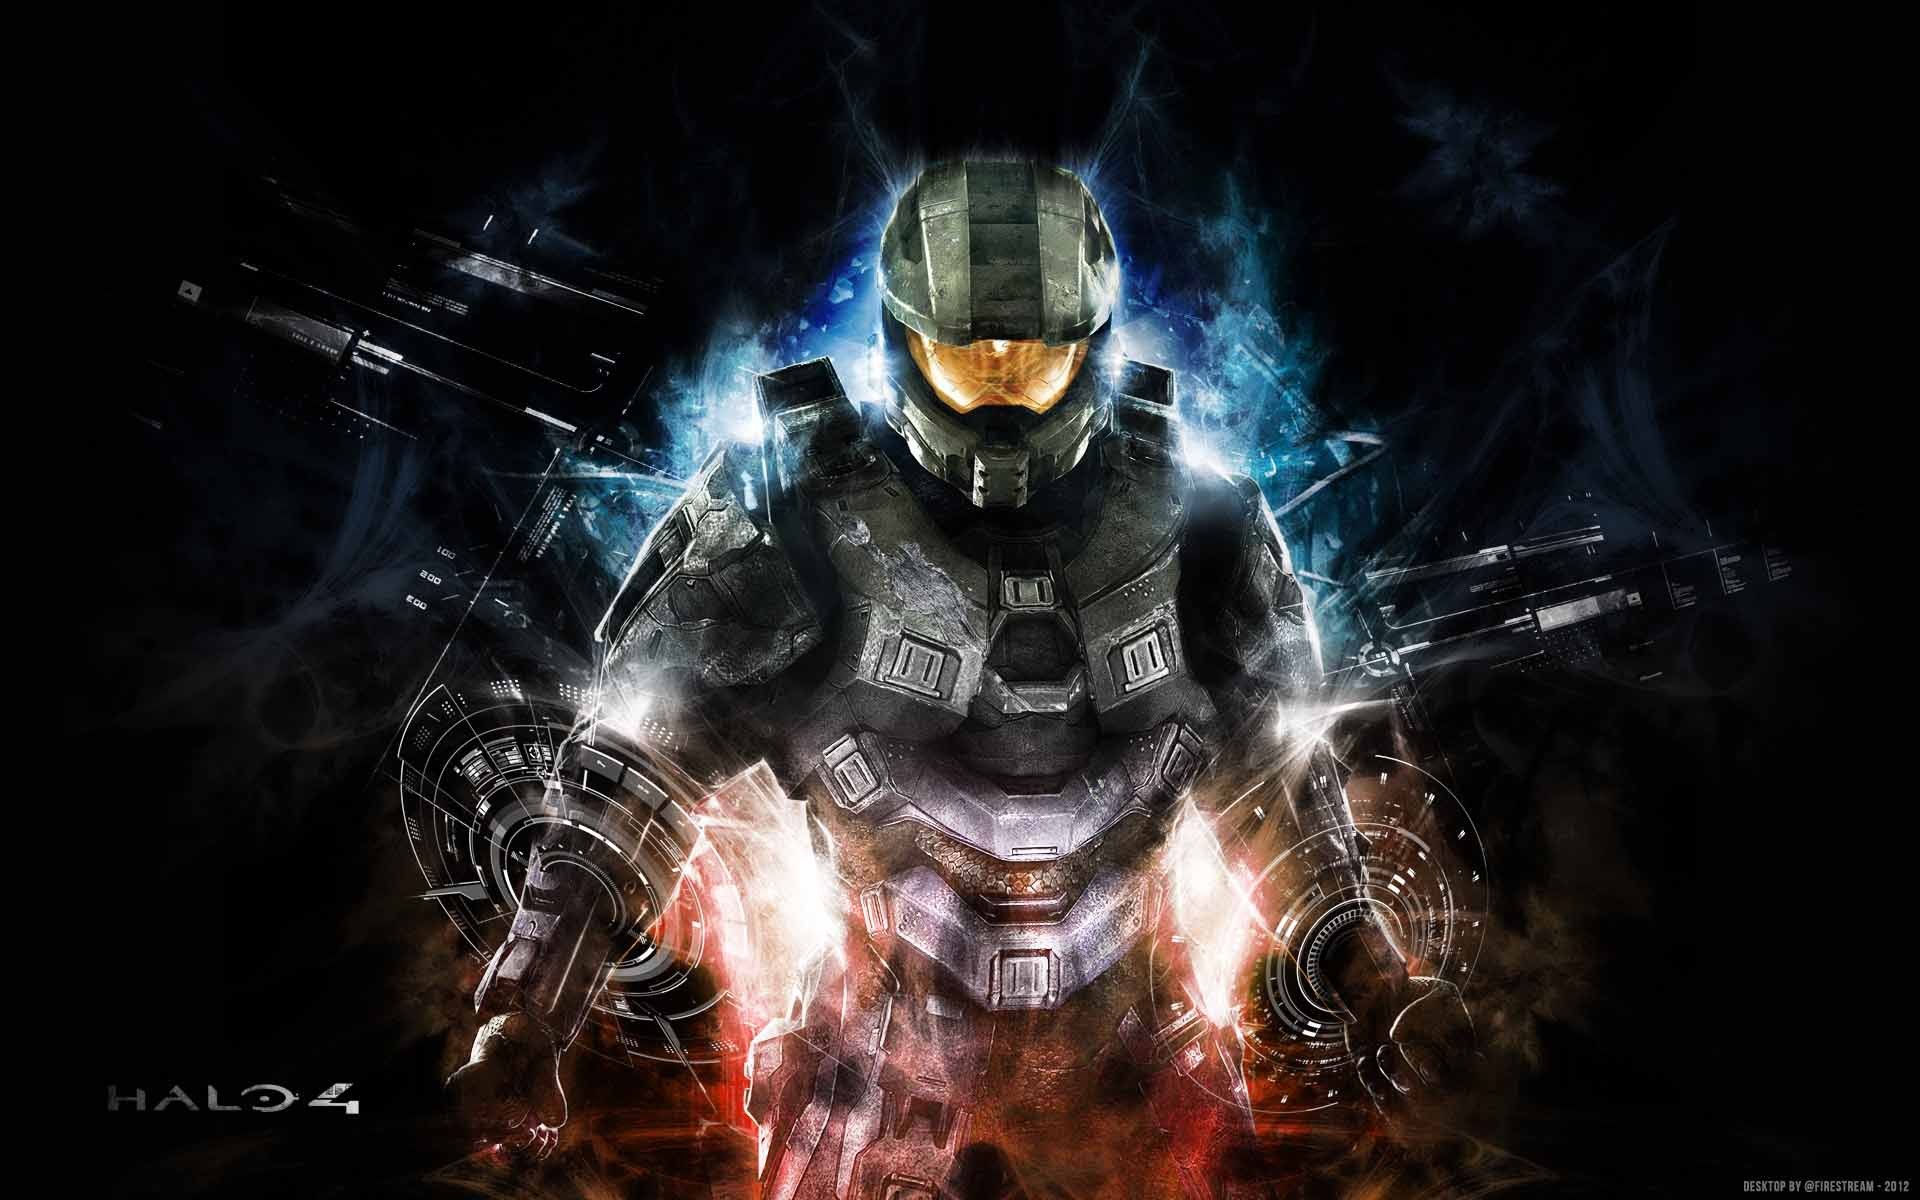 Halo Master Chief Halo 4 343 Industries Video Games Artwork 1920x1200